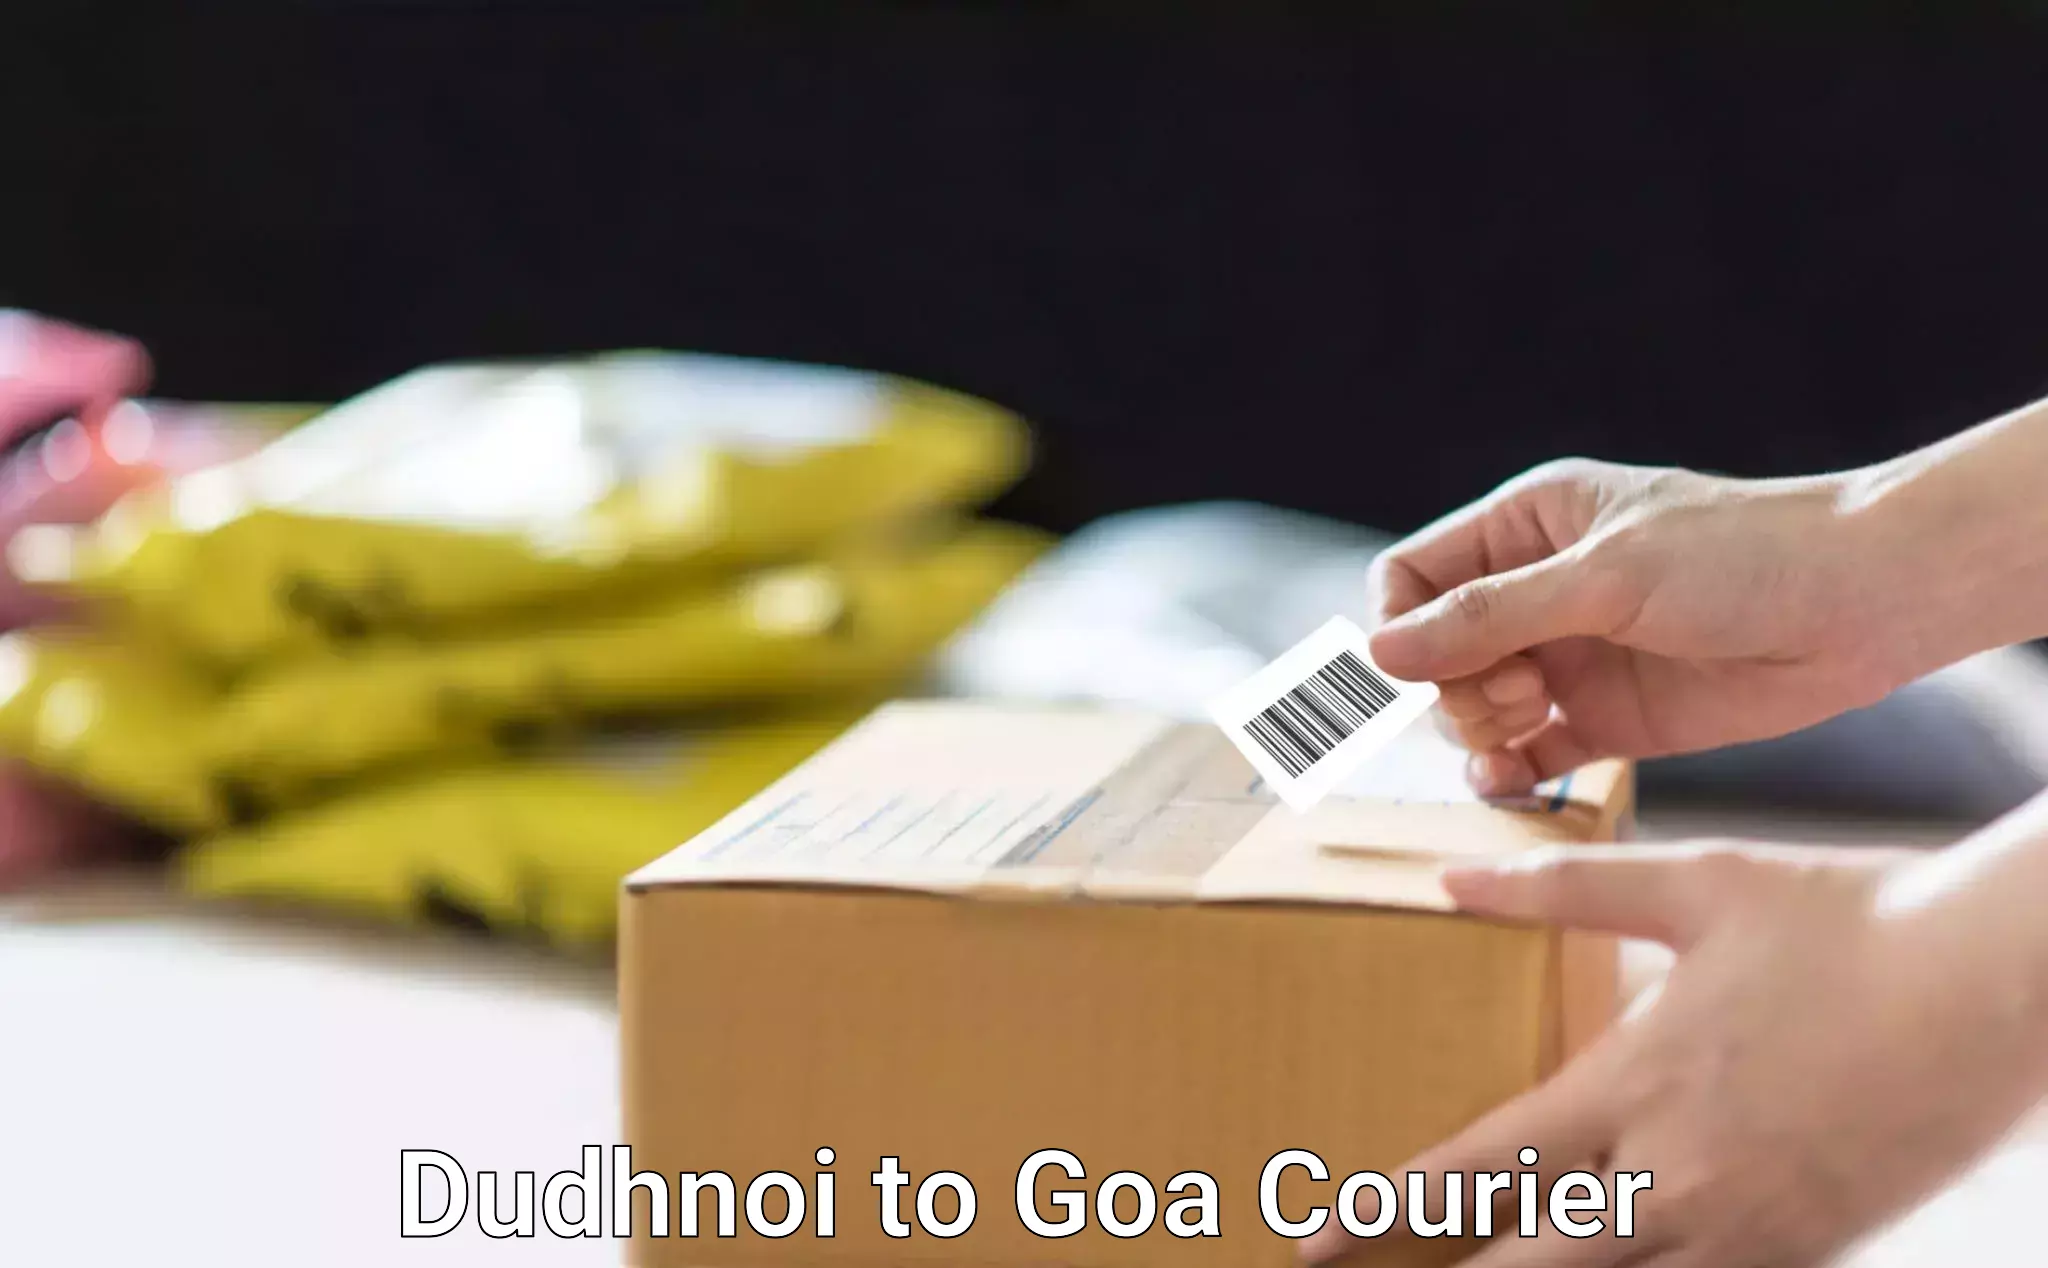 Advanced shipping services Dudhnoi to Panaji